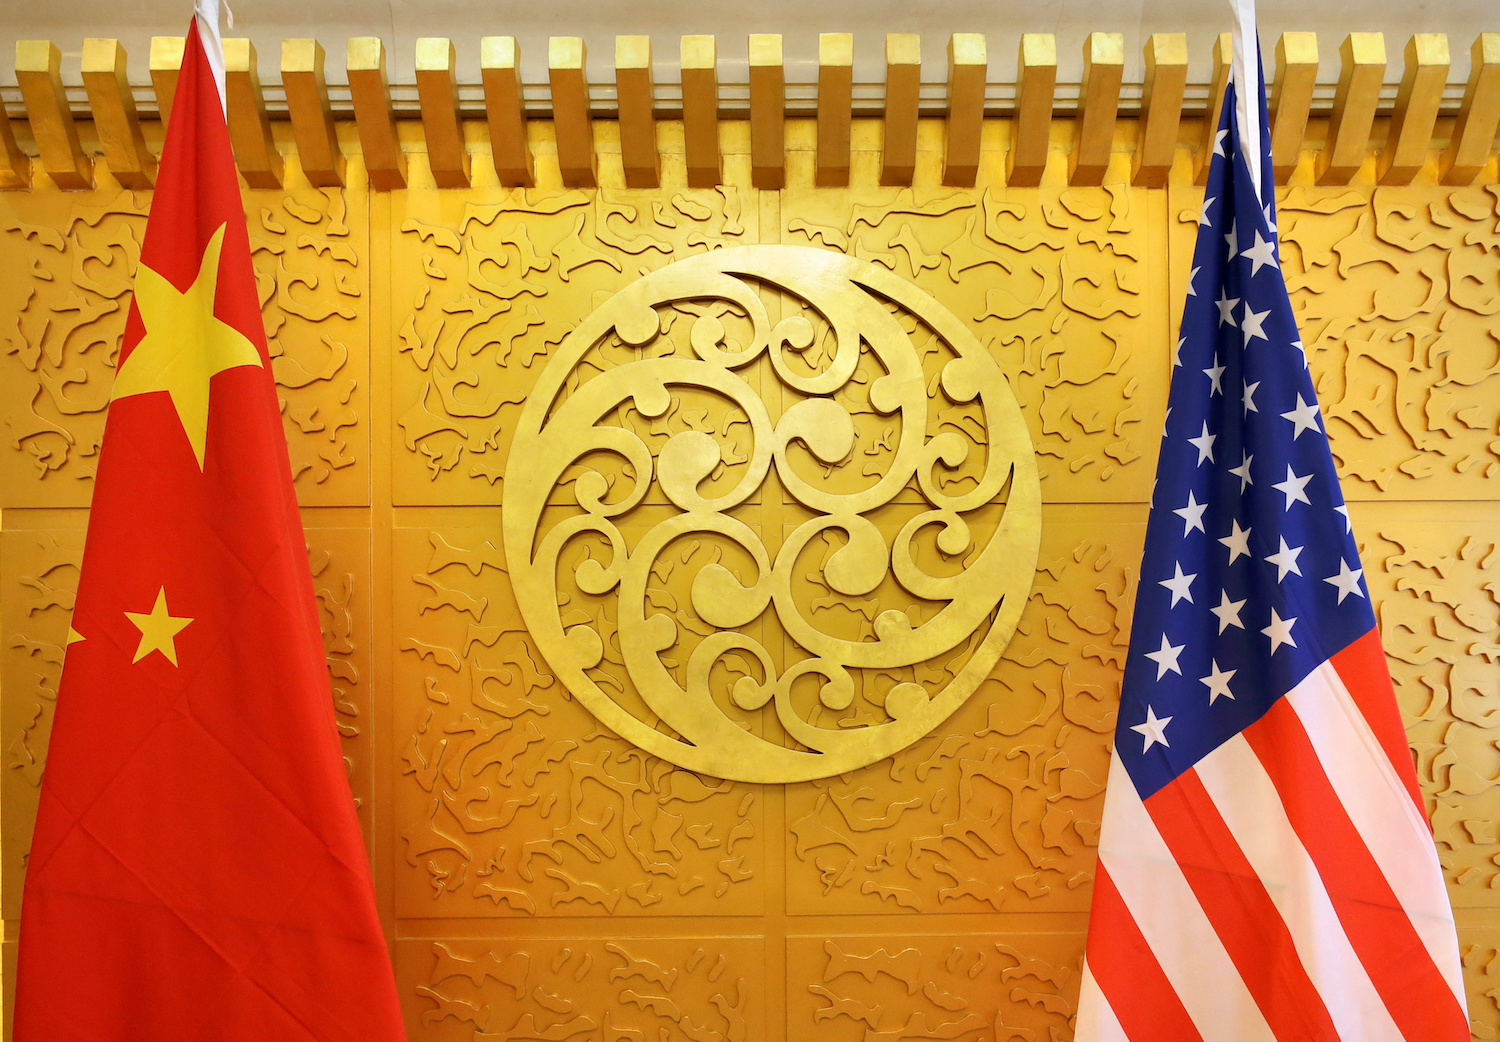 China Paper Says US Blocking Tech Takeovers a ‘Red Flag’ for World